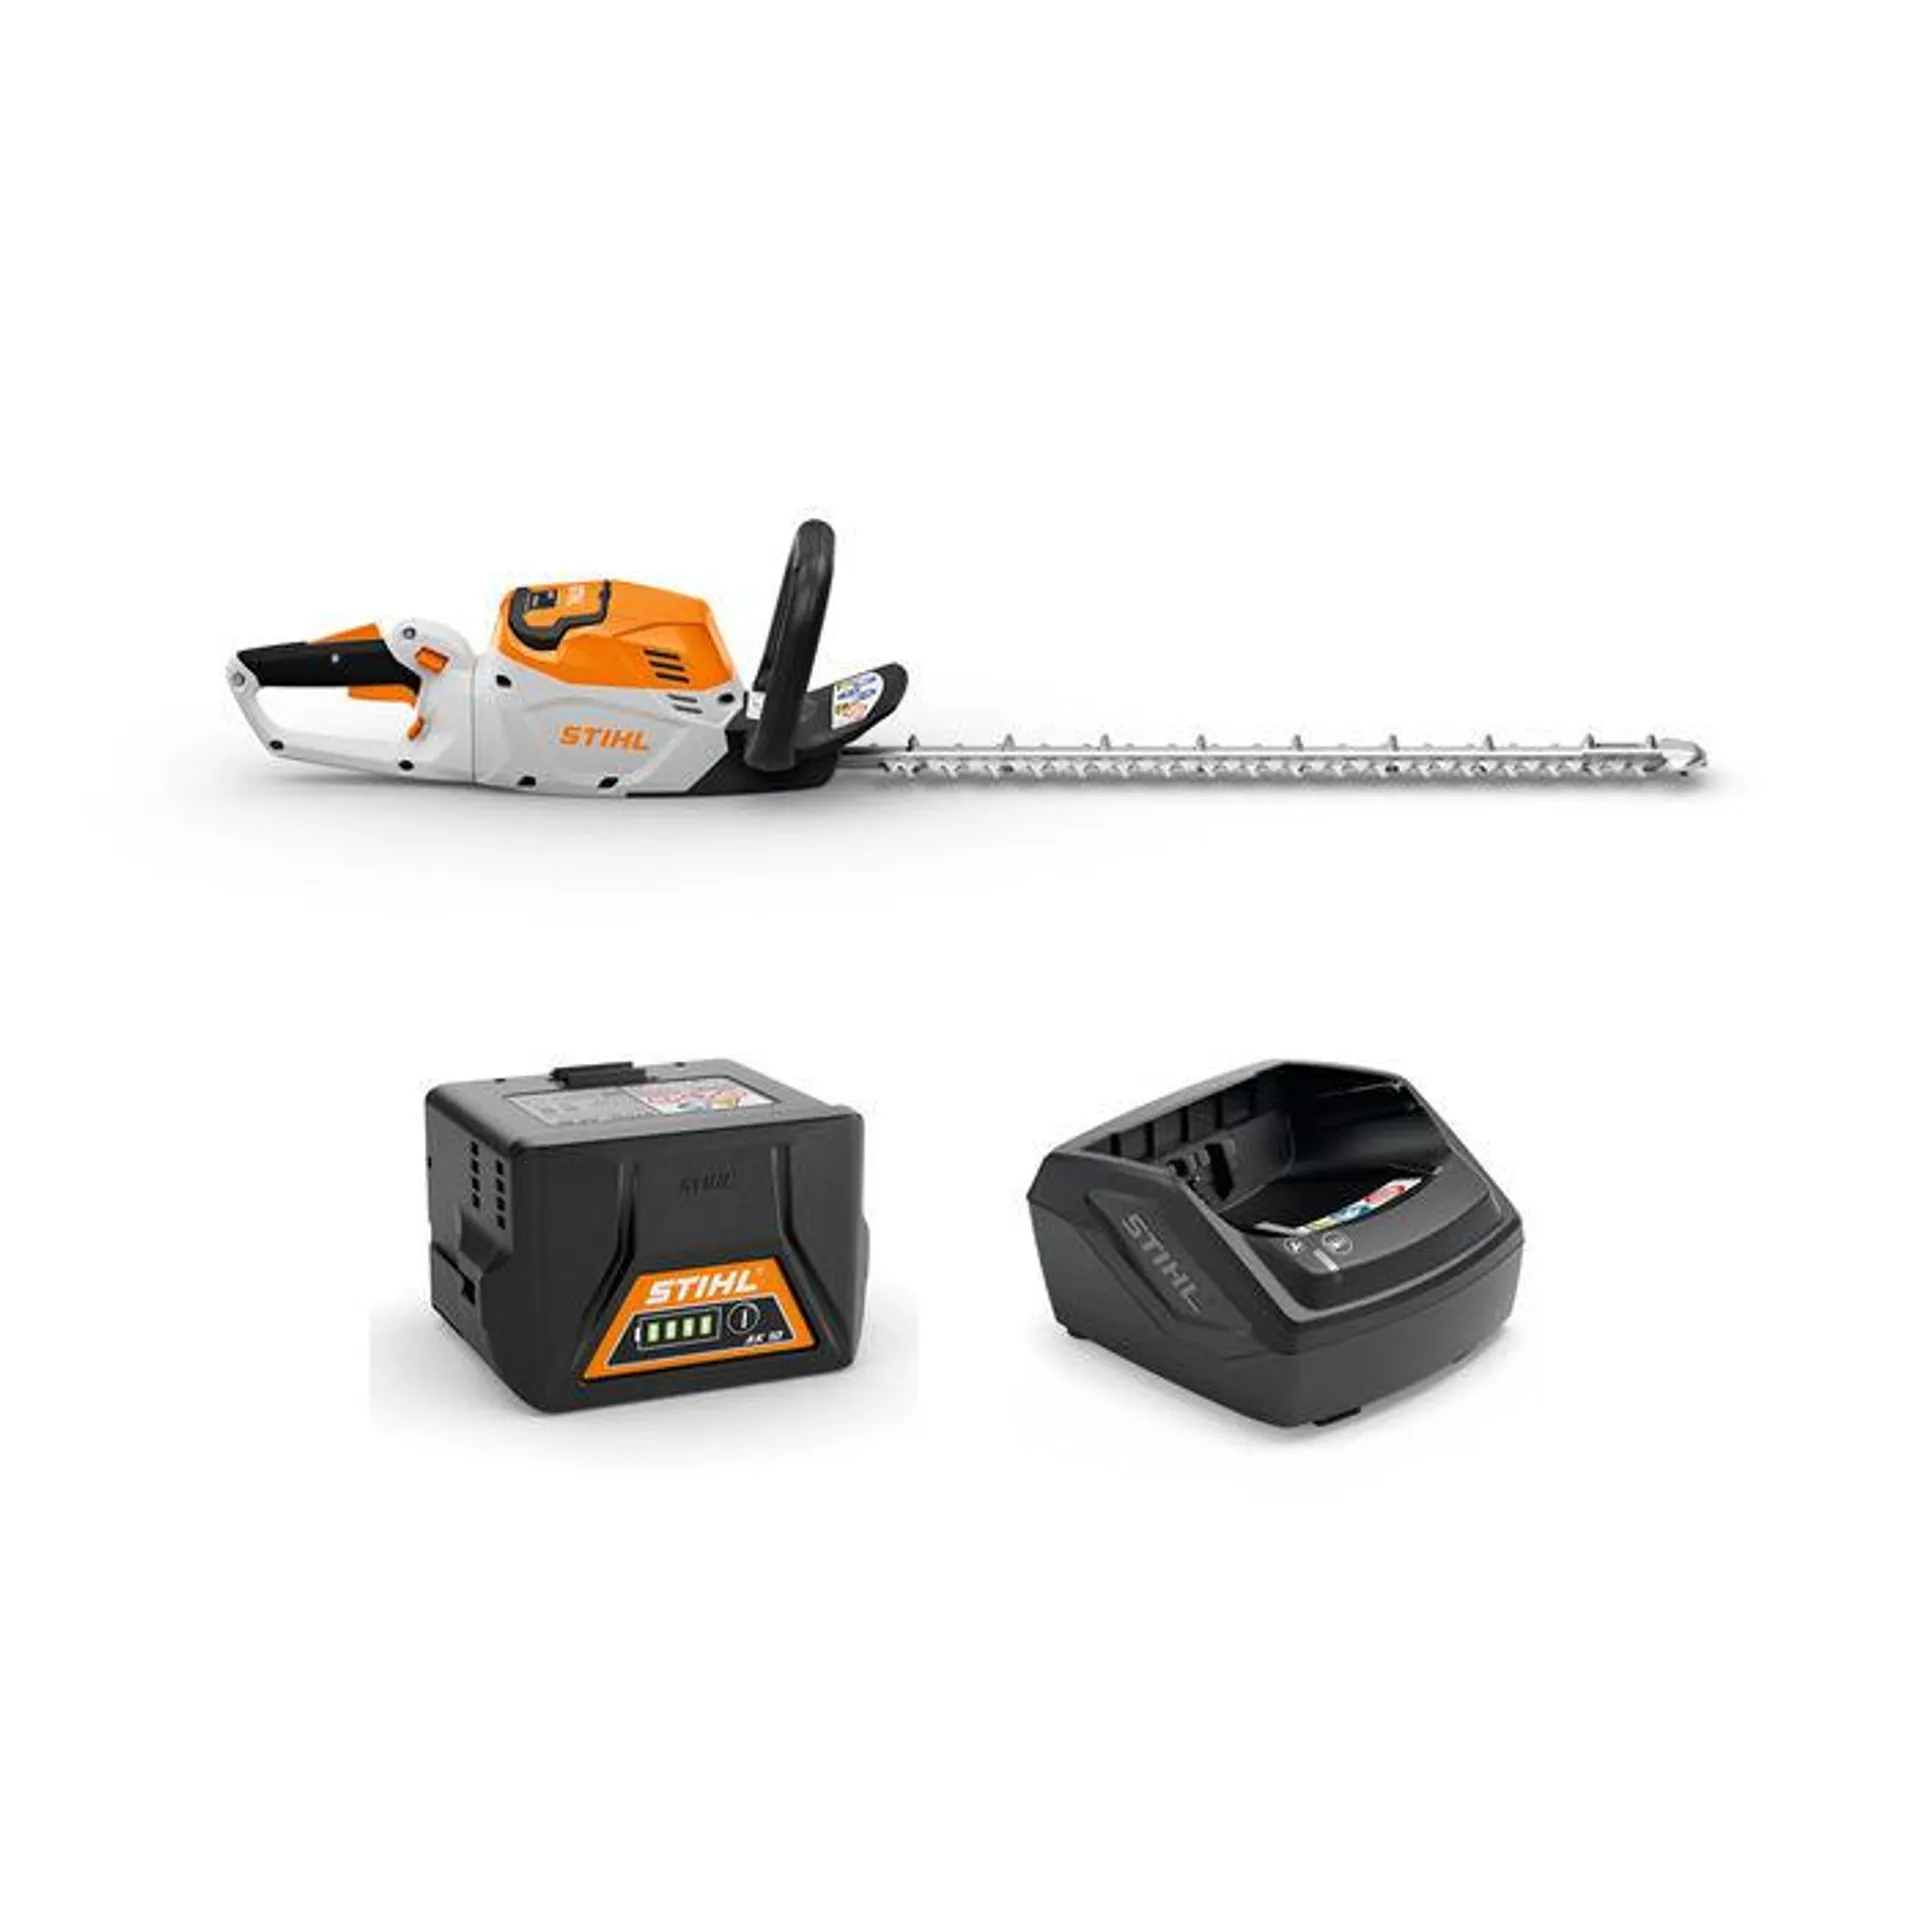 STIHL HSA 60 Battery Hedgetrimmer Kit (With Battery & Charger)